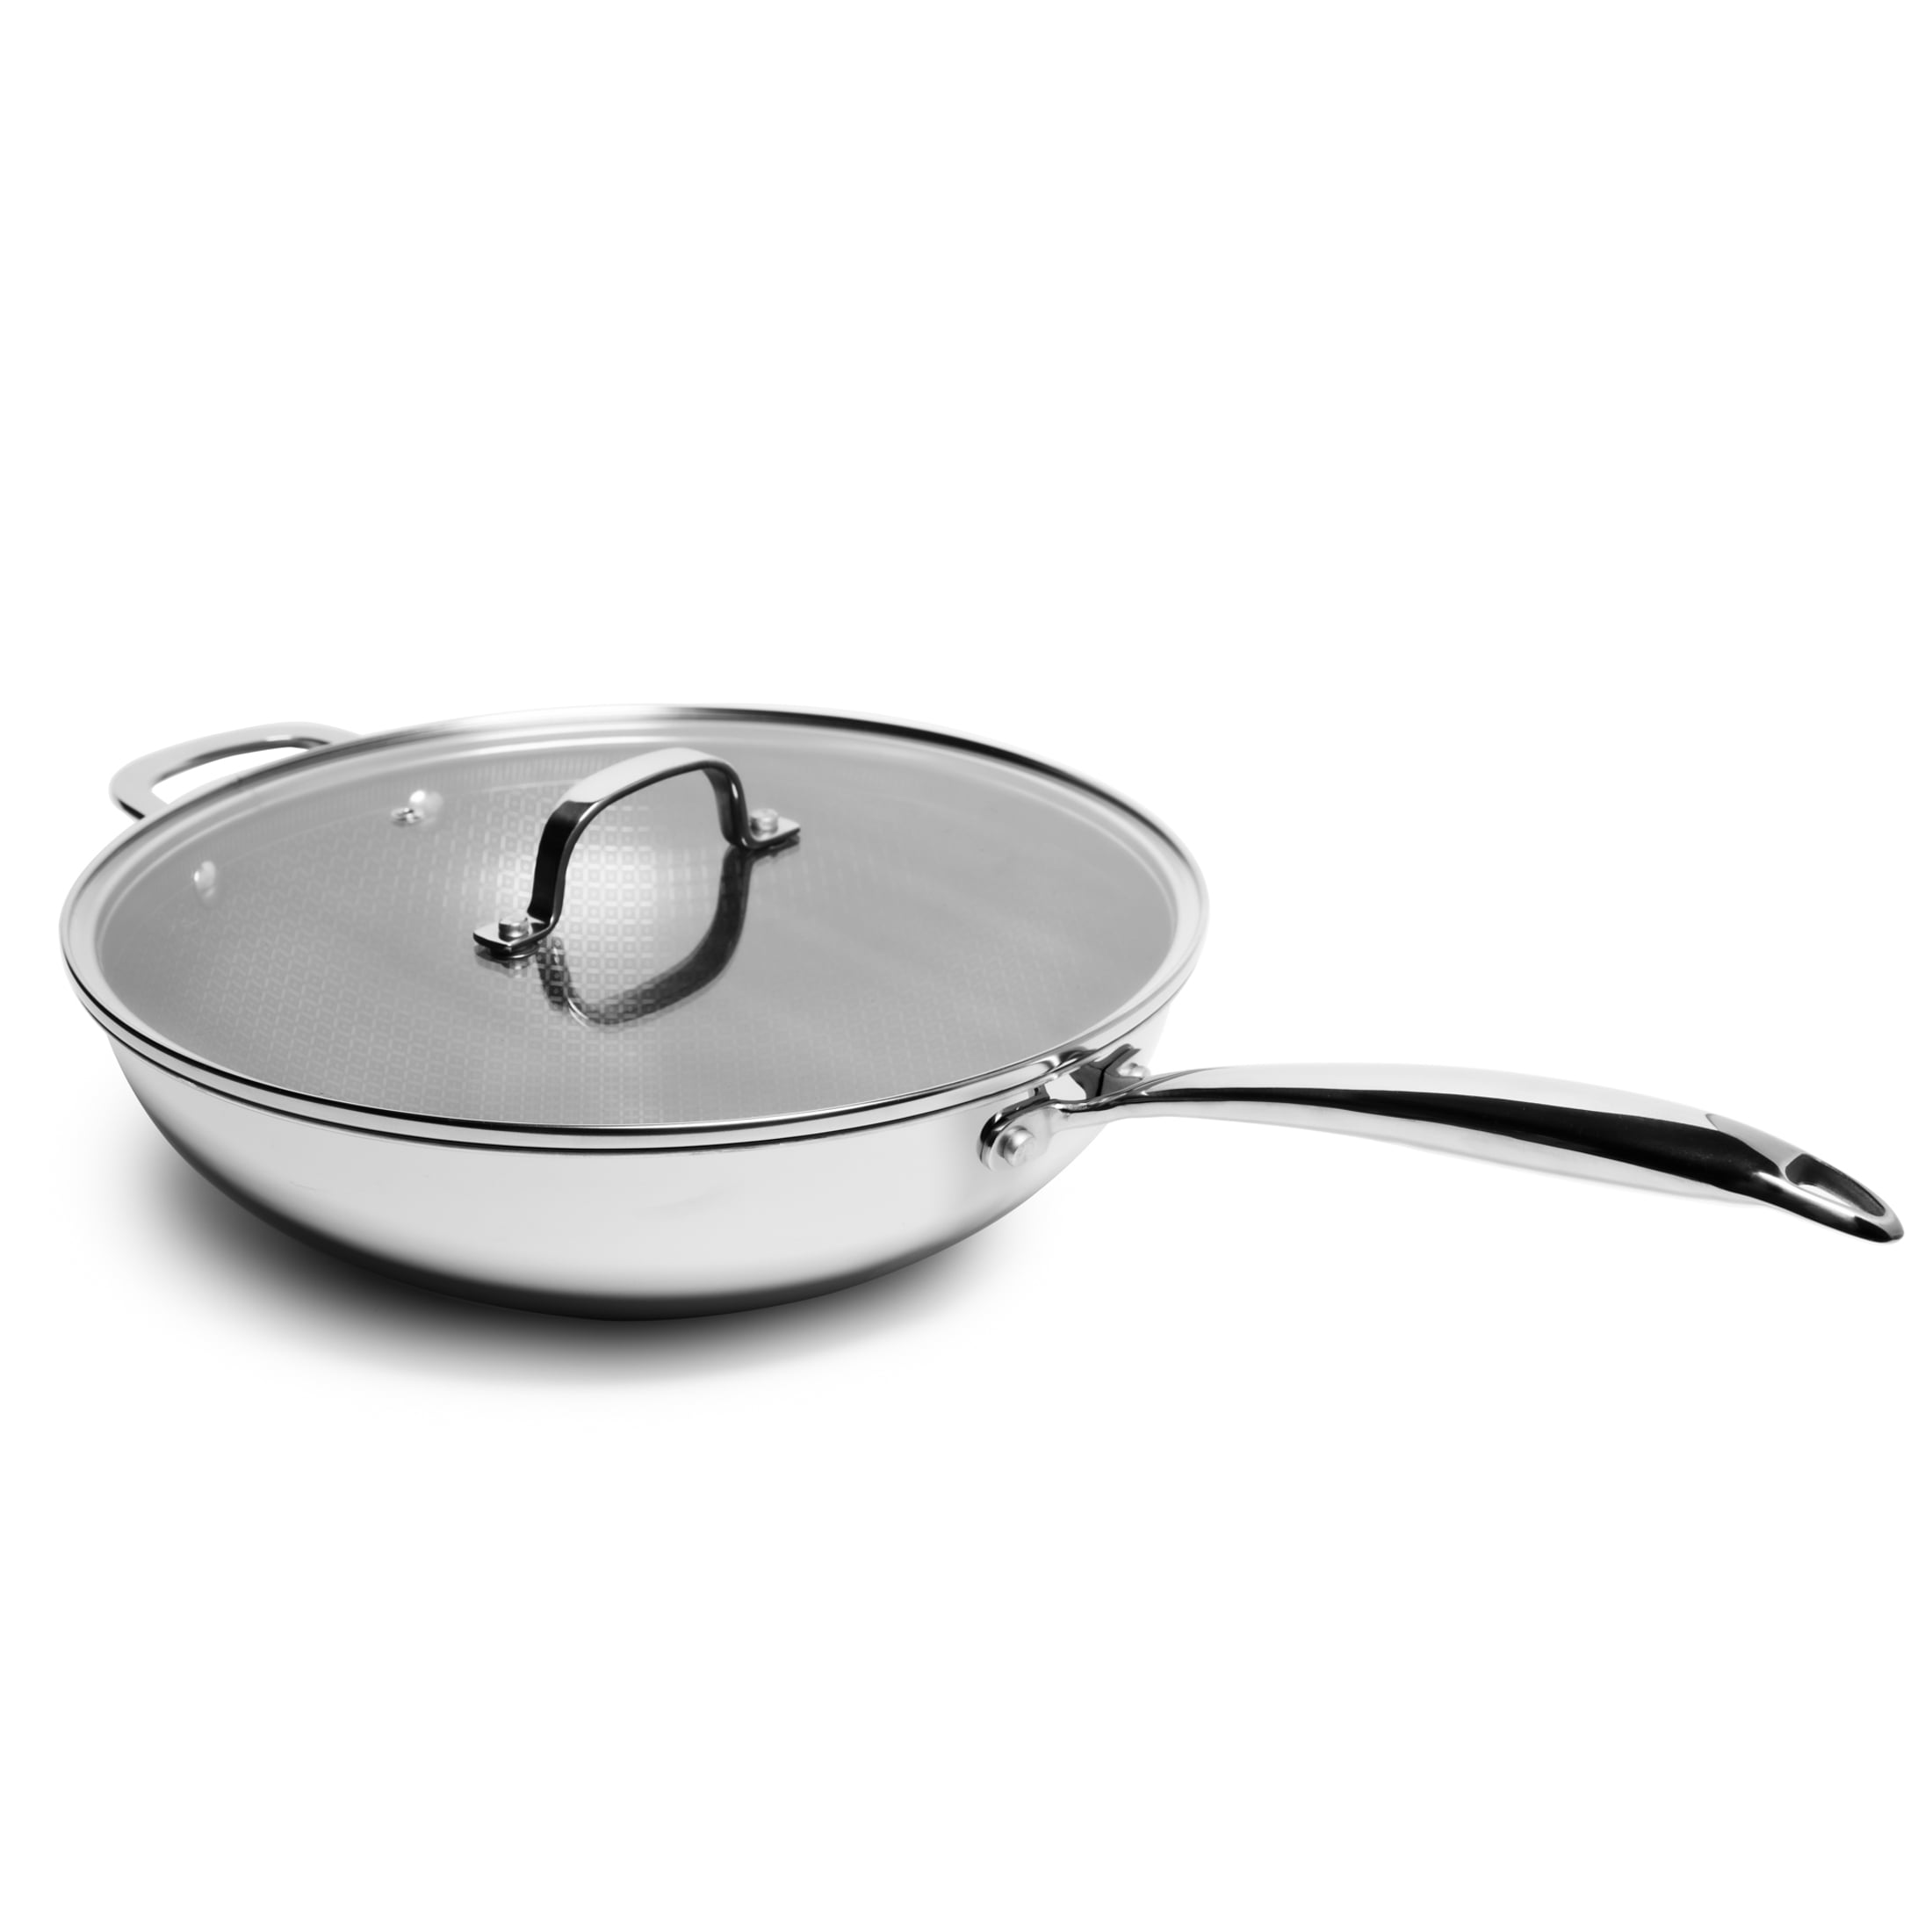 Lexi Home Tri-Ply Stainless Steel Nonstick Frying Pan Size: 12 LB5574